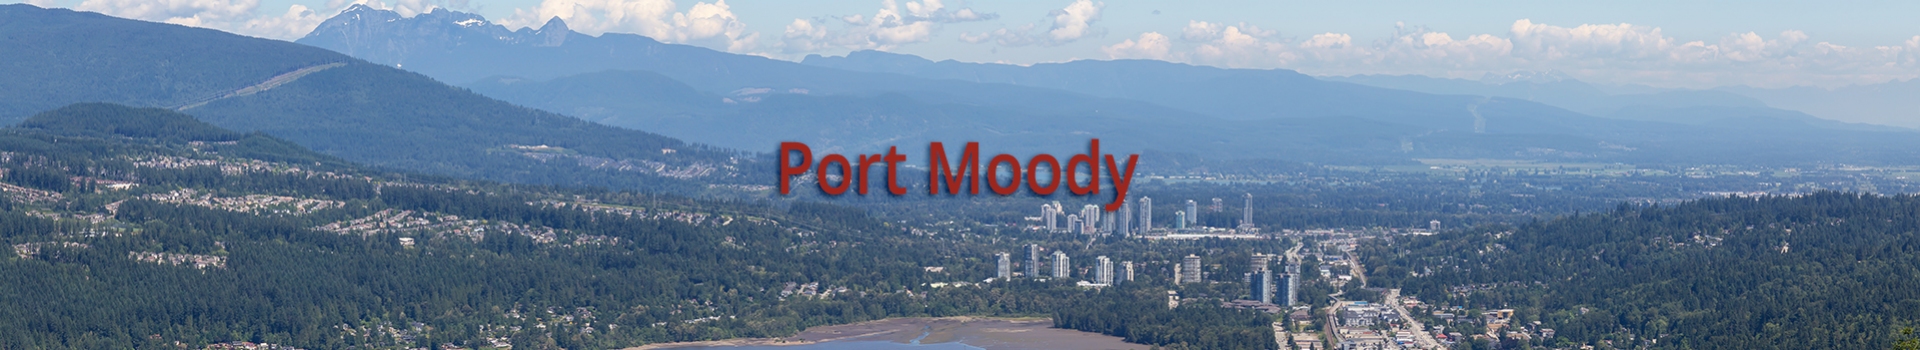 notary-public-services-port-moody